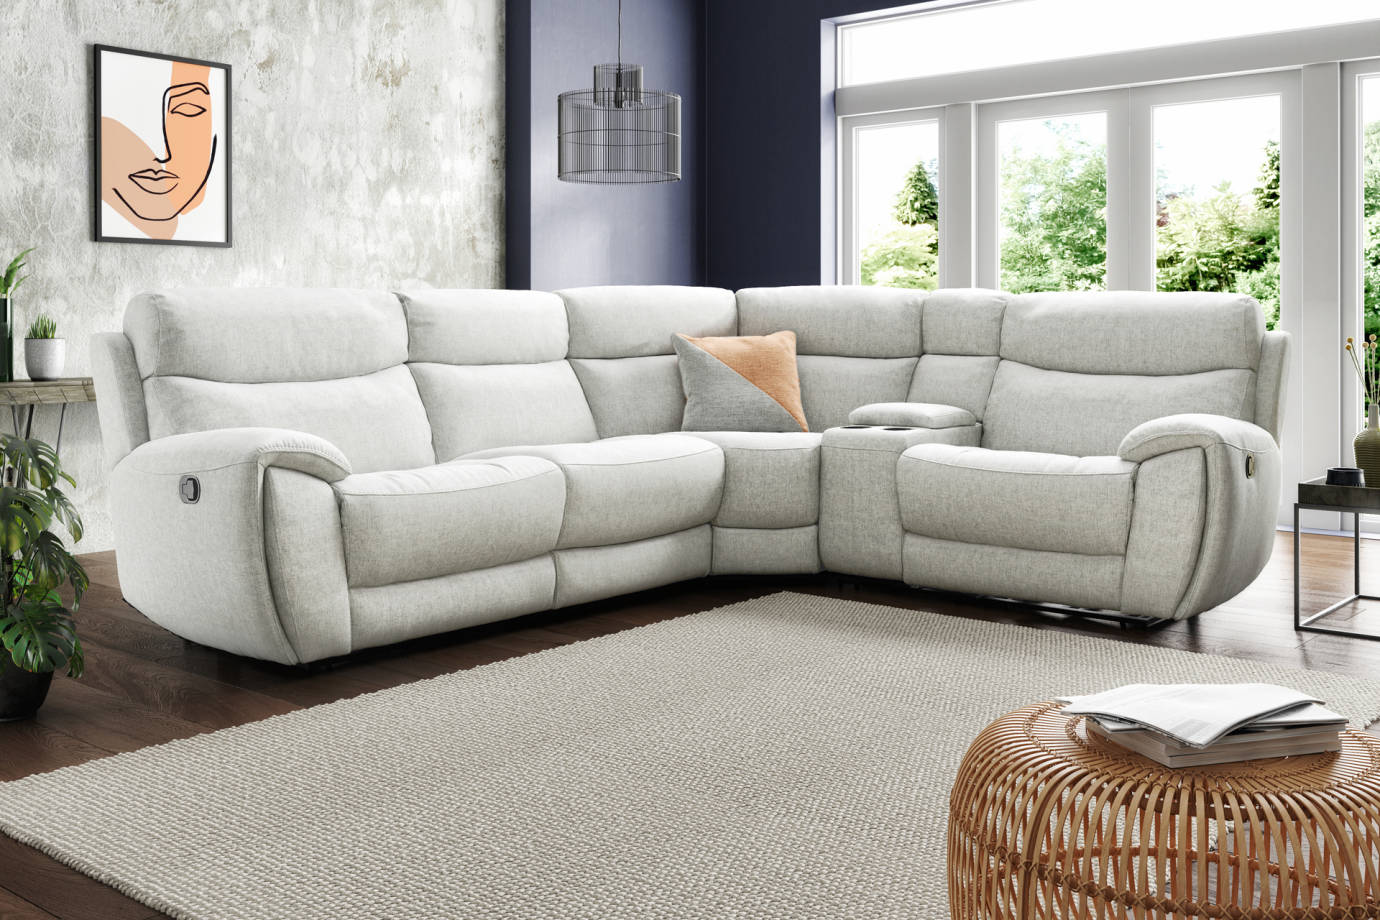 Recliner Sofas Leather Fabric And, Modern Leather Corner Recliner Sofa